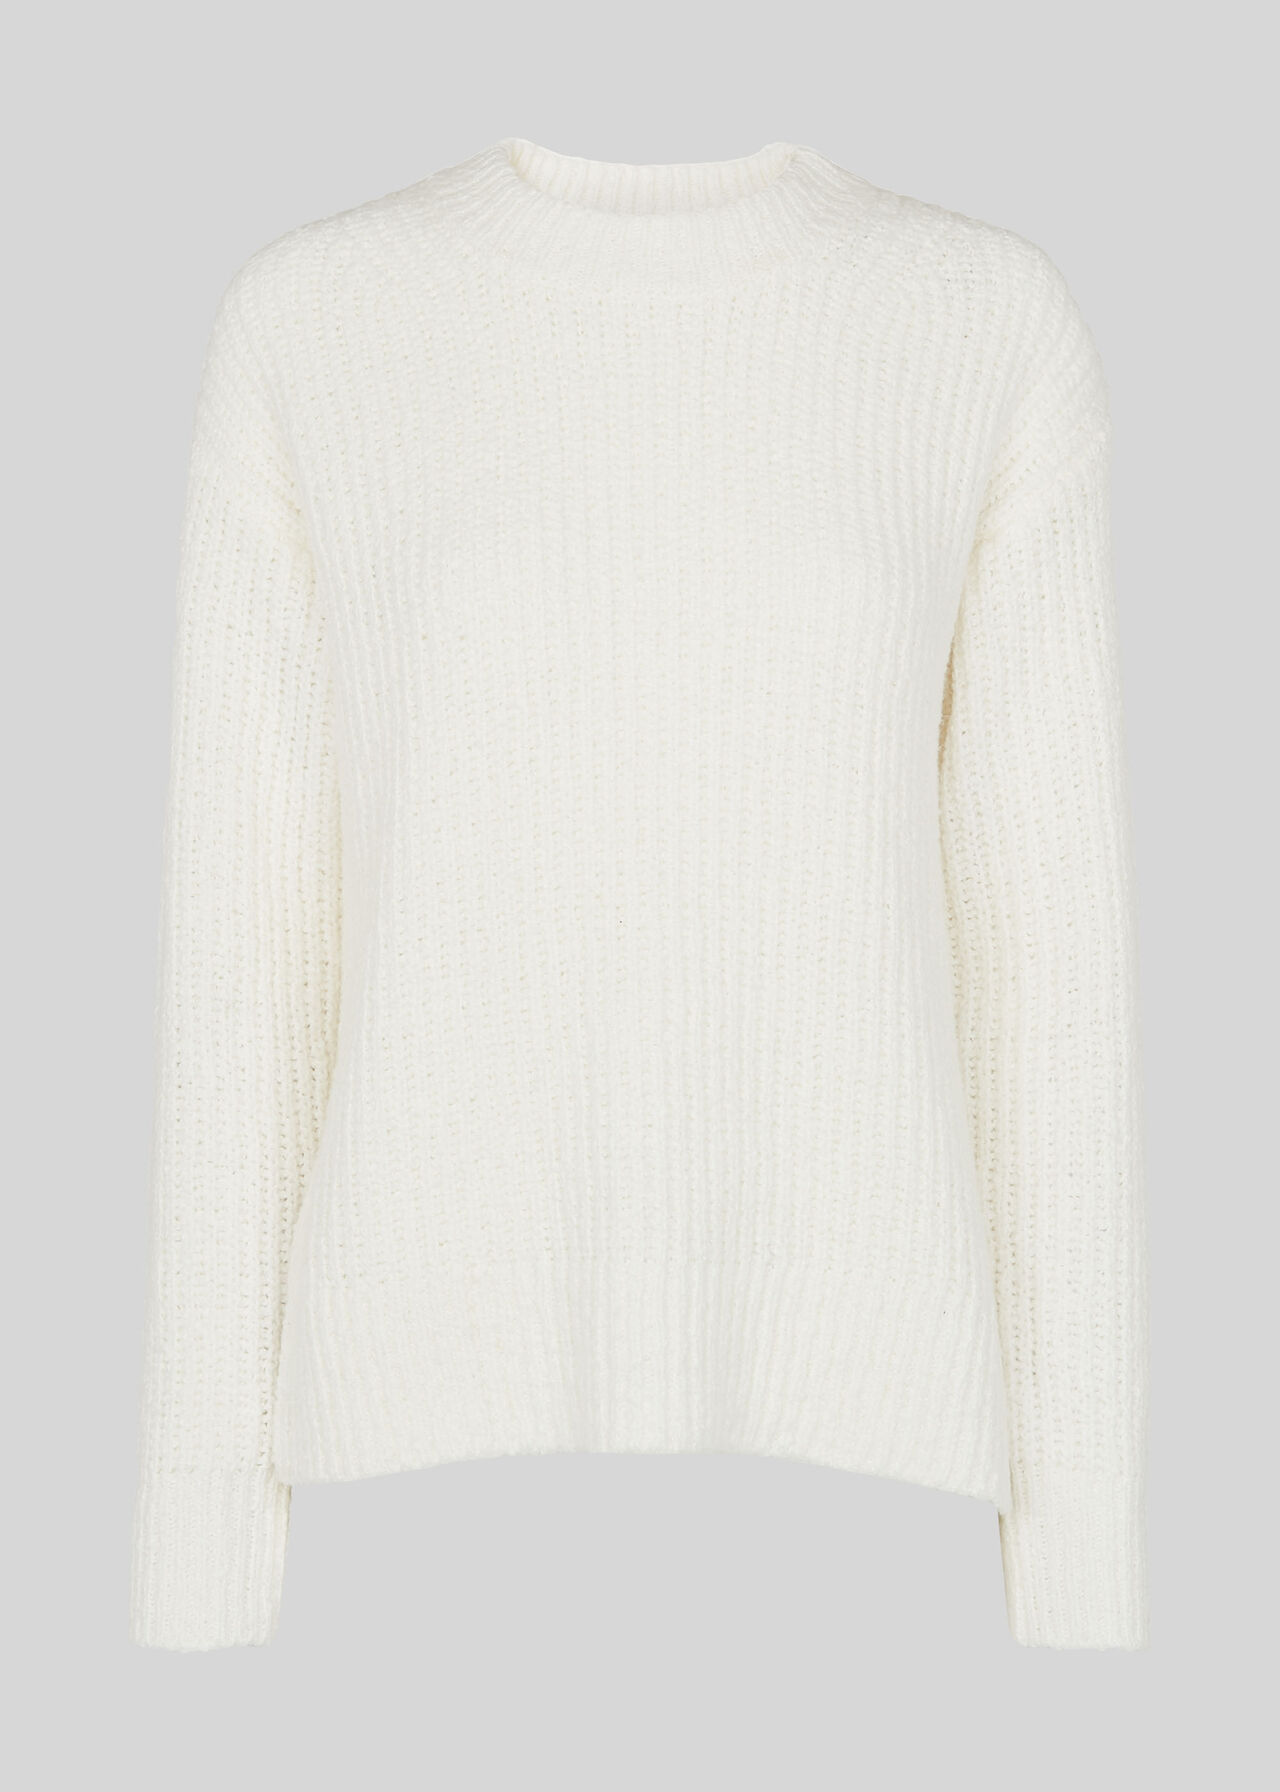 Ivory Madeline Textured Knit | WHISTLES